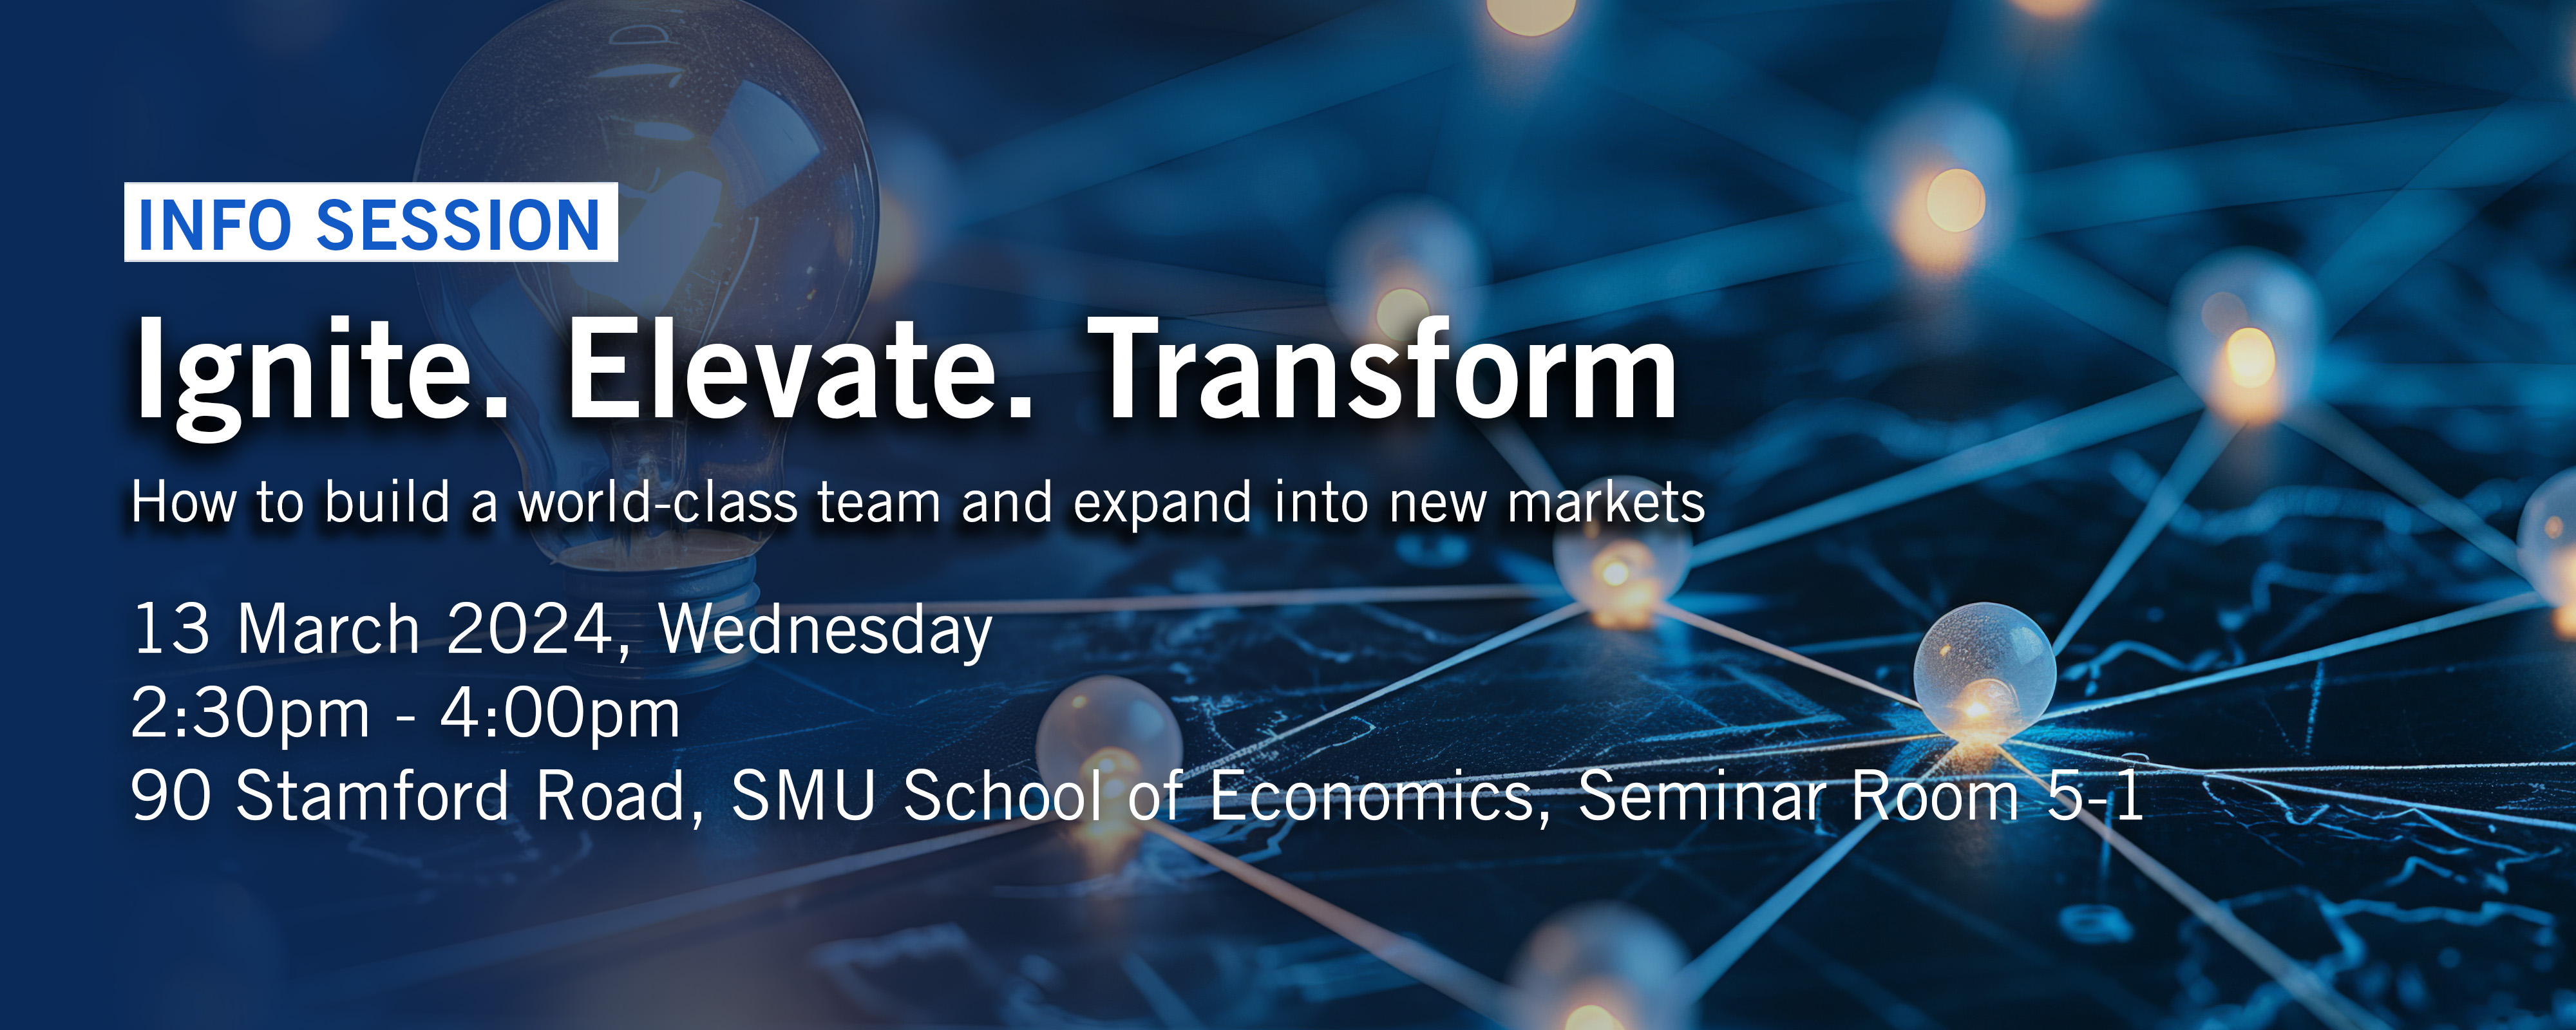 Info Session: How to Build a World-class Team & Expand into New Markets